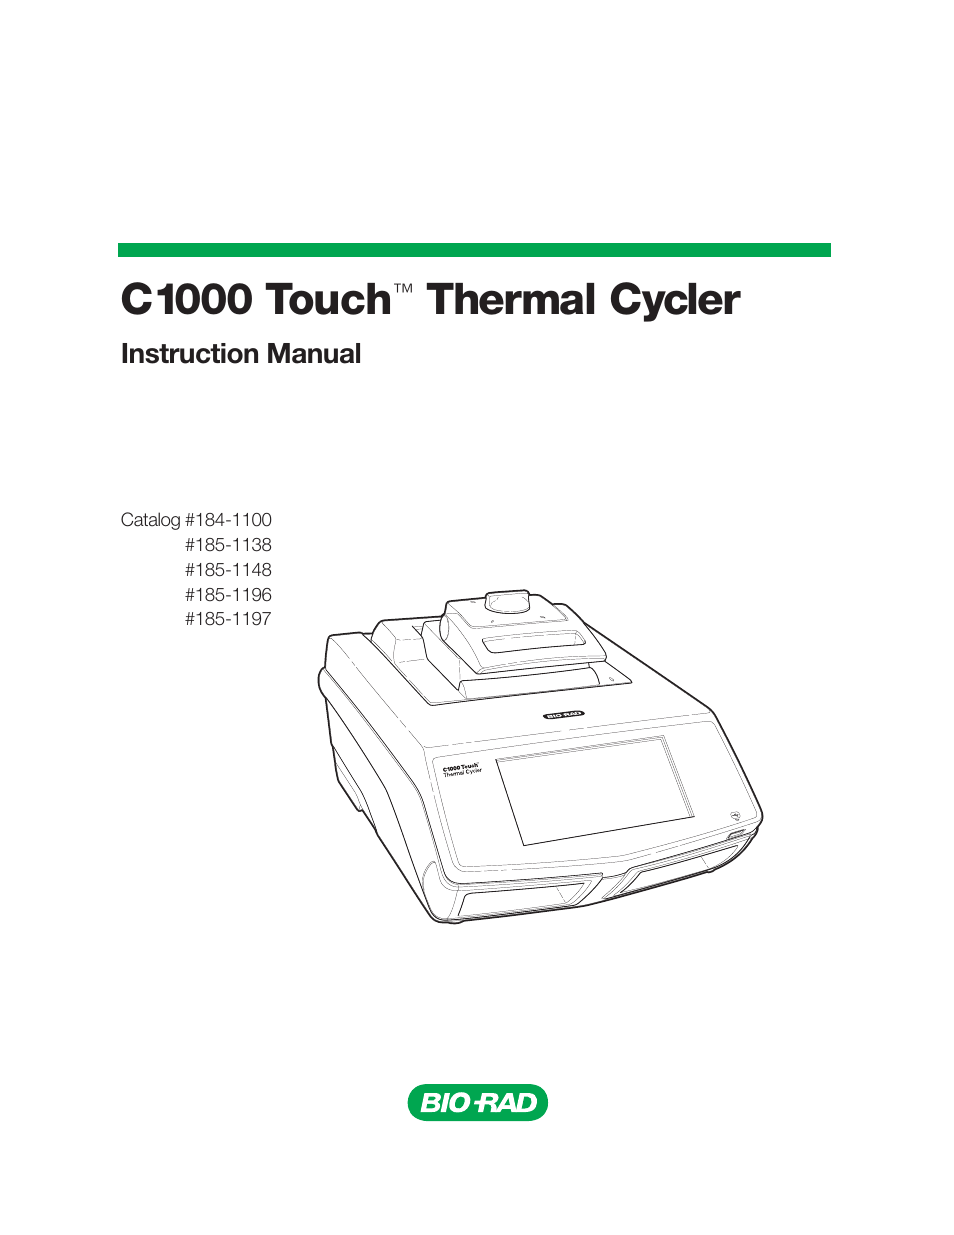 Bio-Rad C1000 Touch™ Thermal Cycler User Manual | 61 pages | Also for